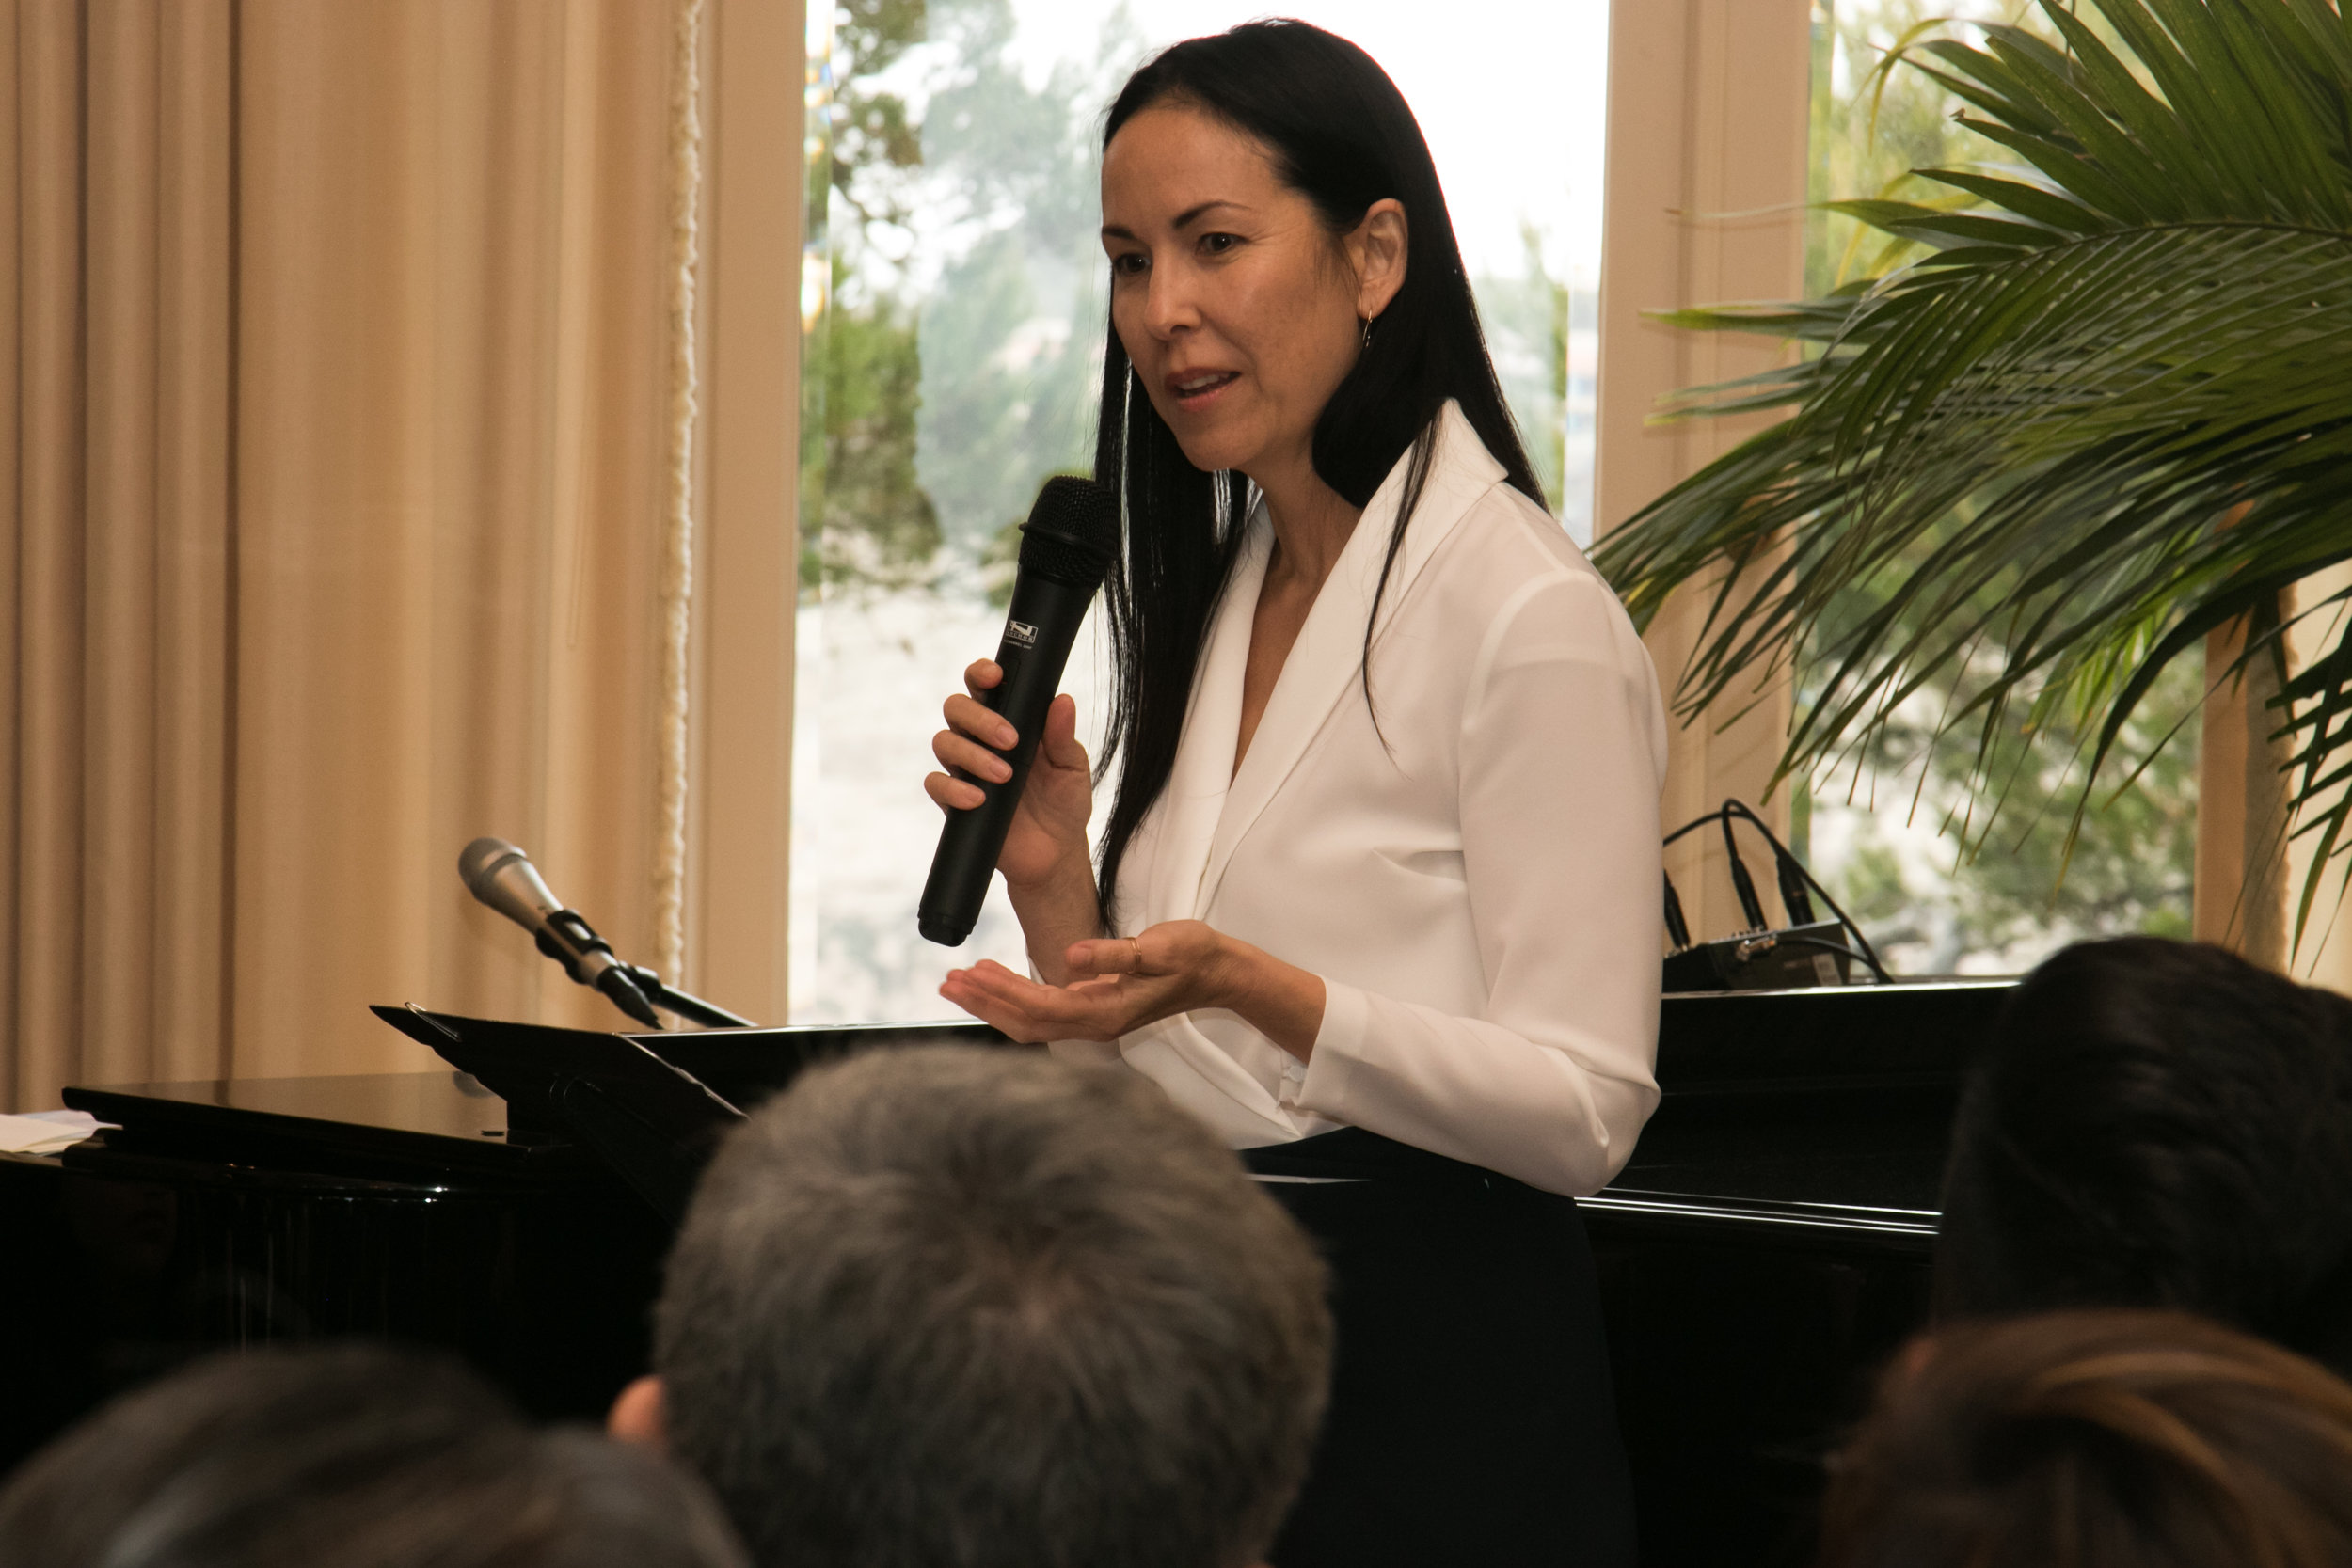 A woman with long straight black hair speaks with a microphone to a group with a piano behind her.